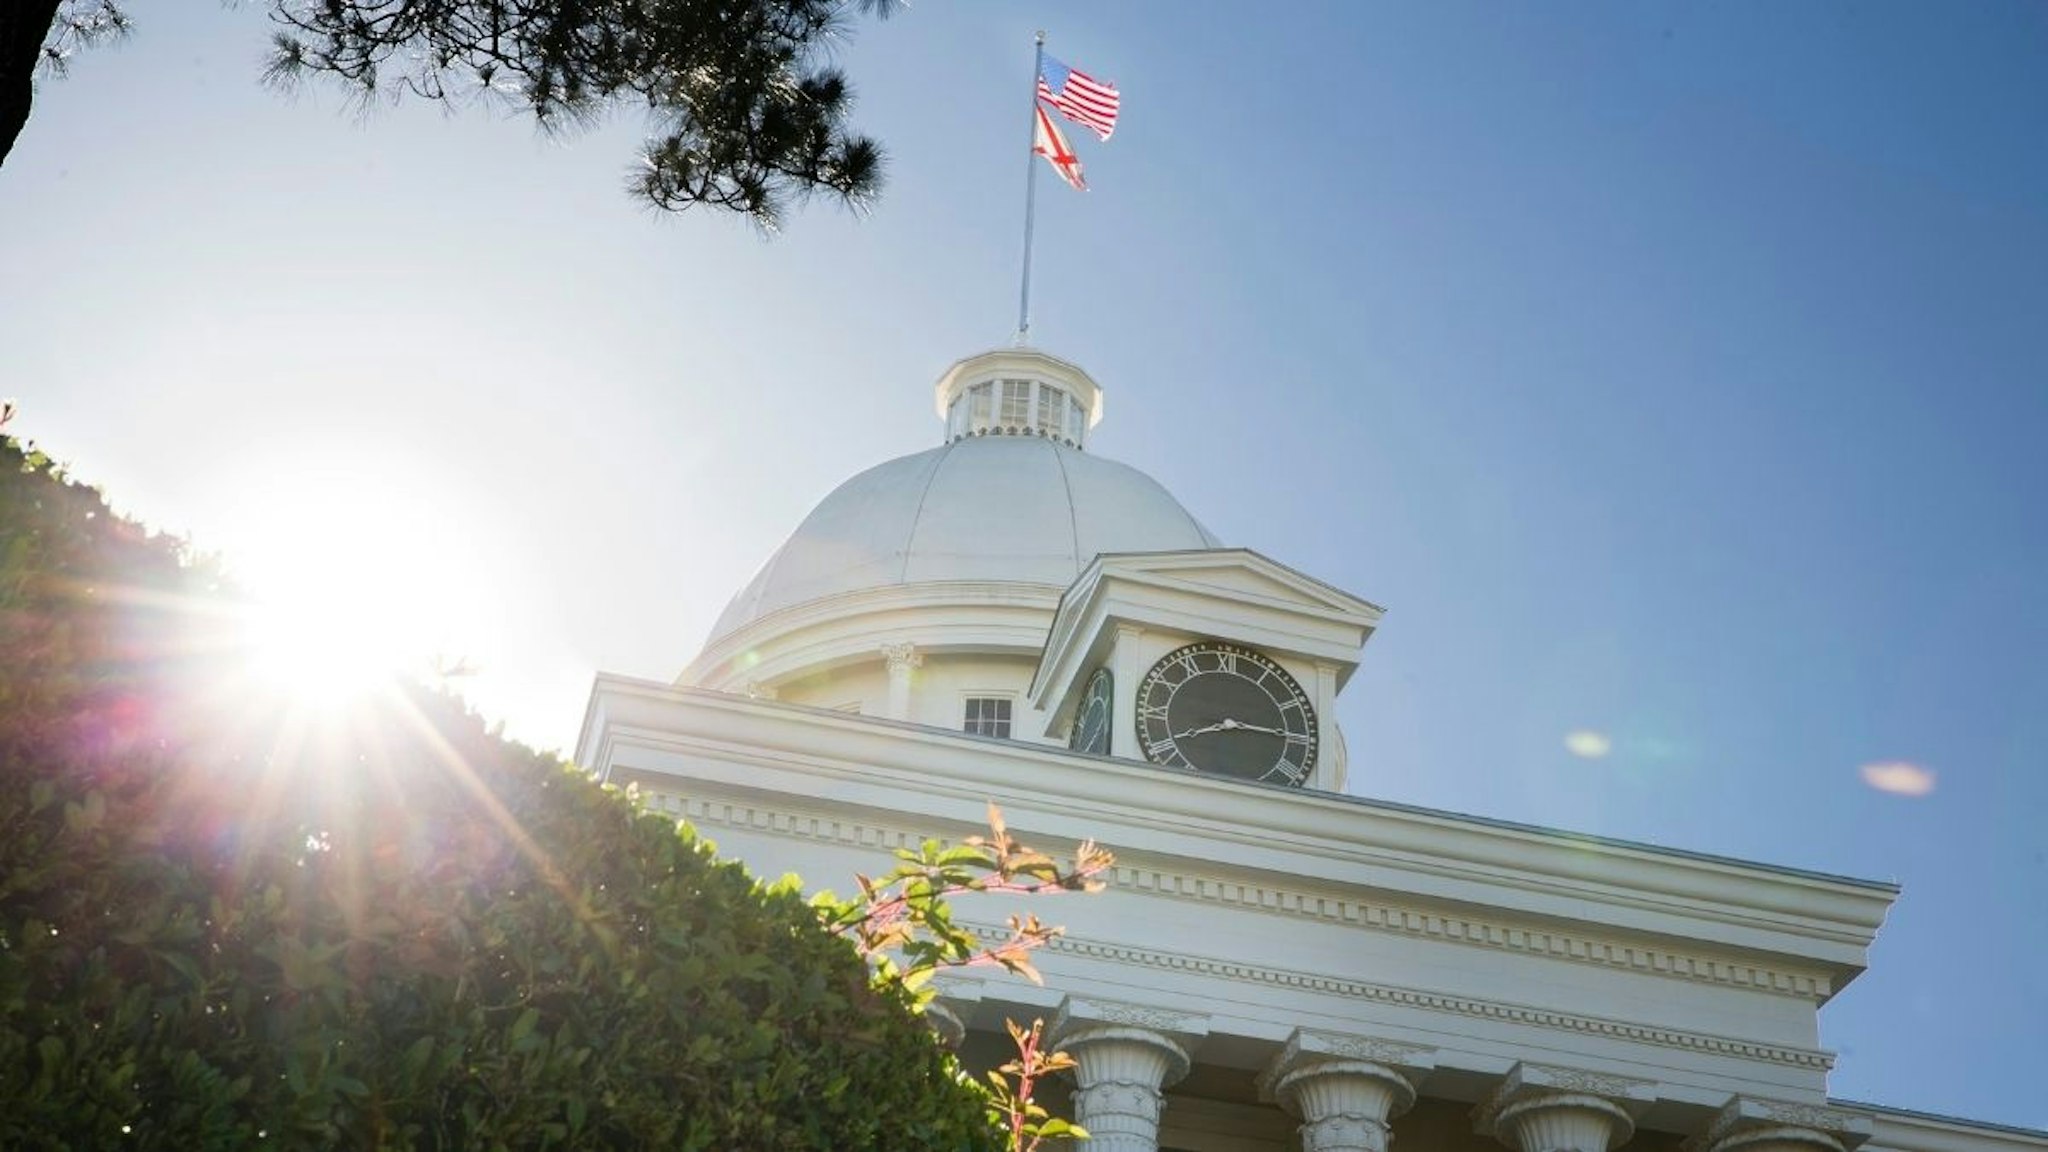 The Alabama State Capitol building is seen on Tuesday, May 14, 2019 in Montgomery, AL.